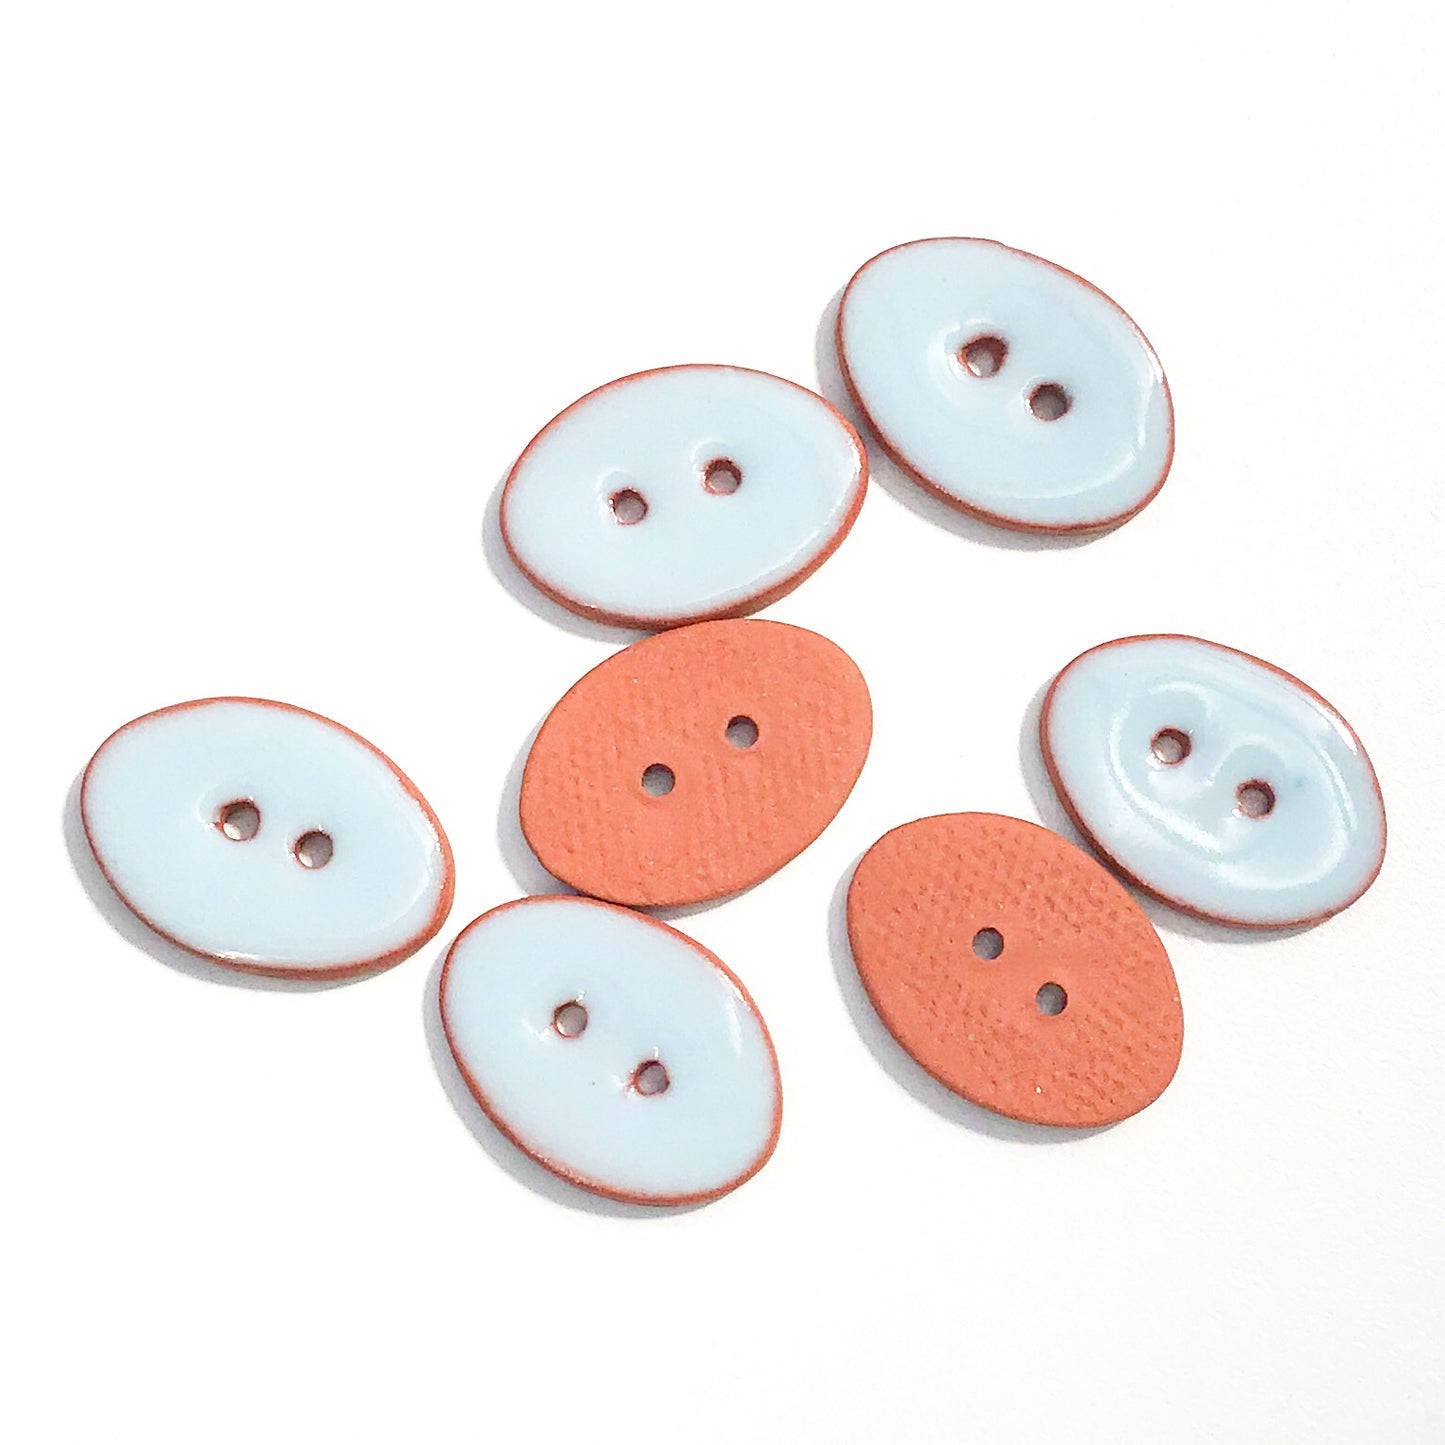 Sky Blue Oval Clay Buttons - 5/8" x 7/8" - 7 Pack (ws-193)